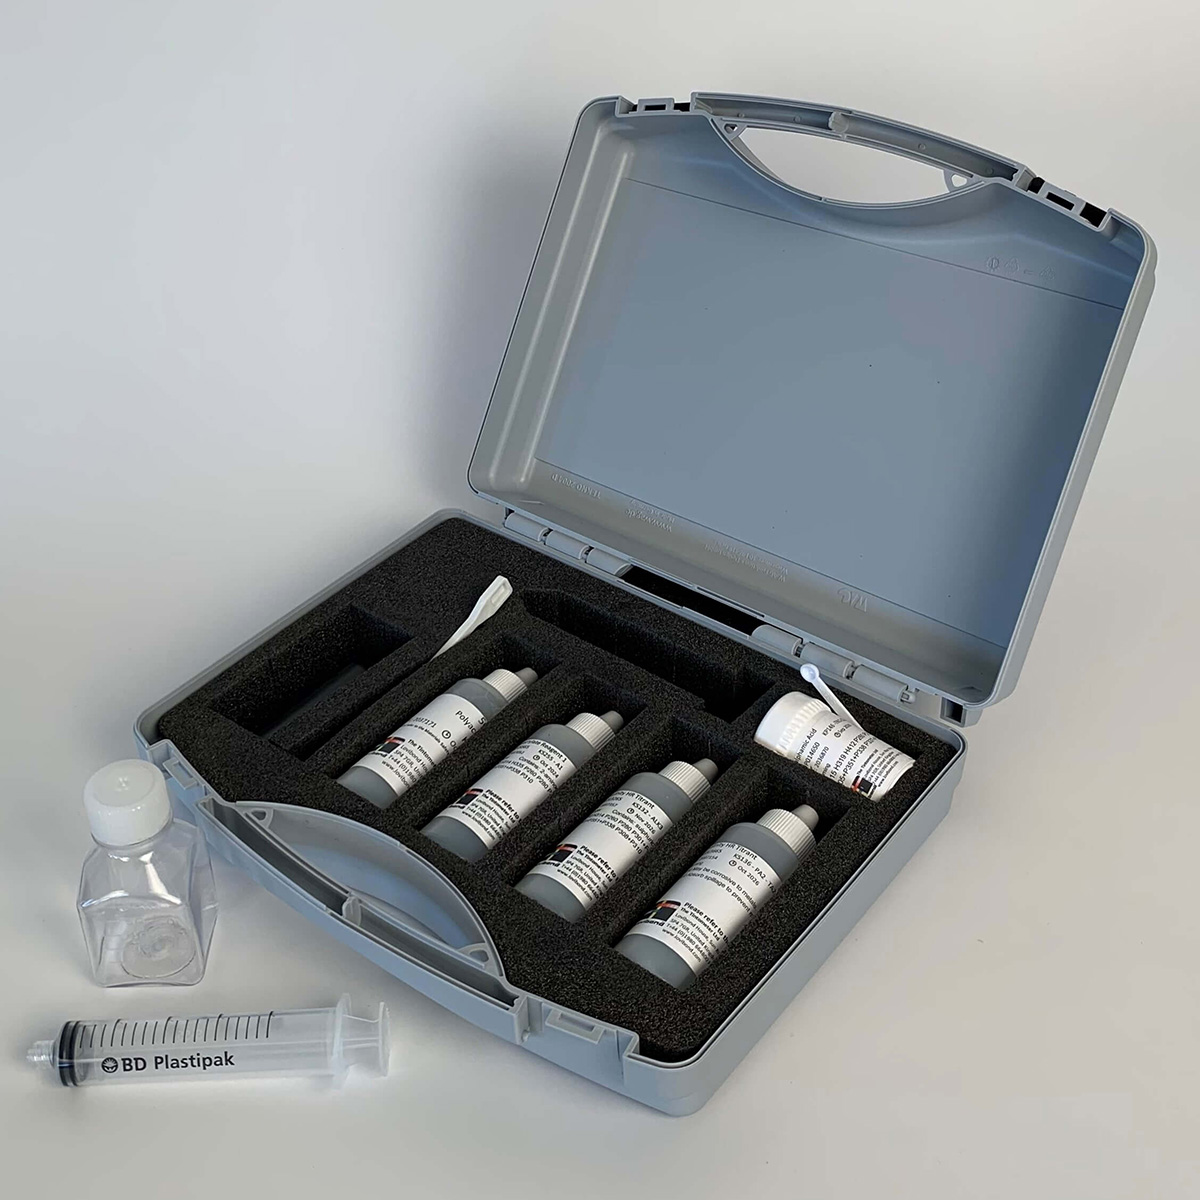 Test Kit for the control of glutaraldehyde in water systems